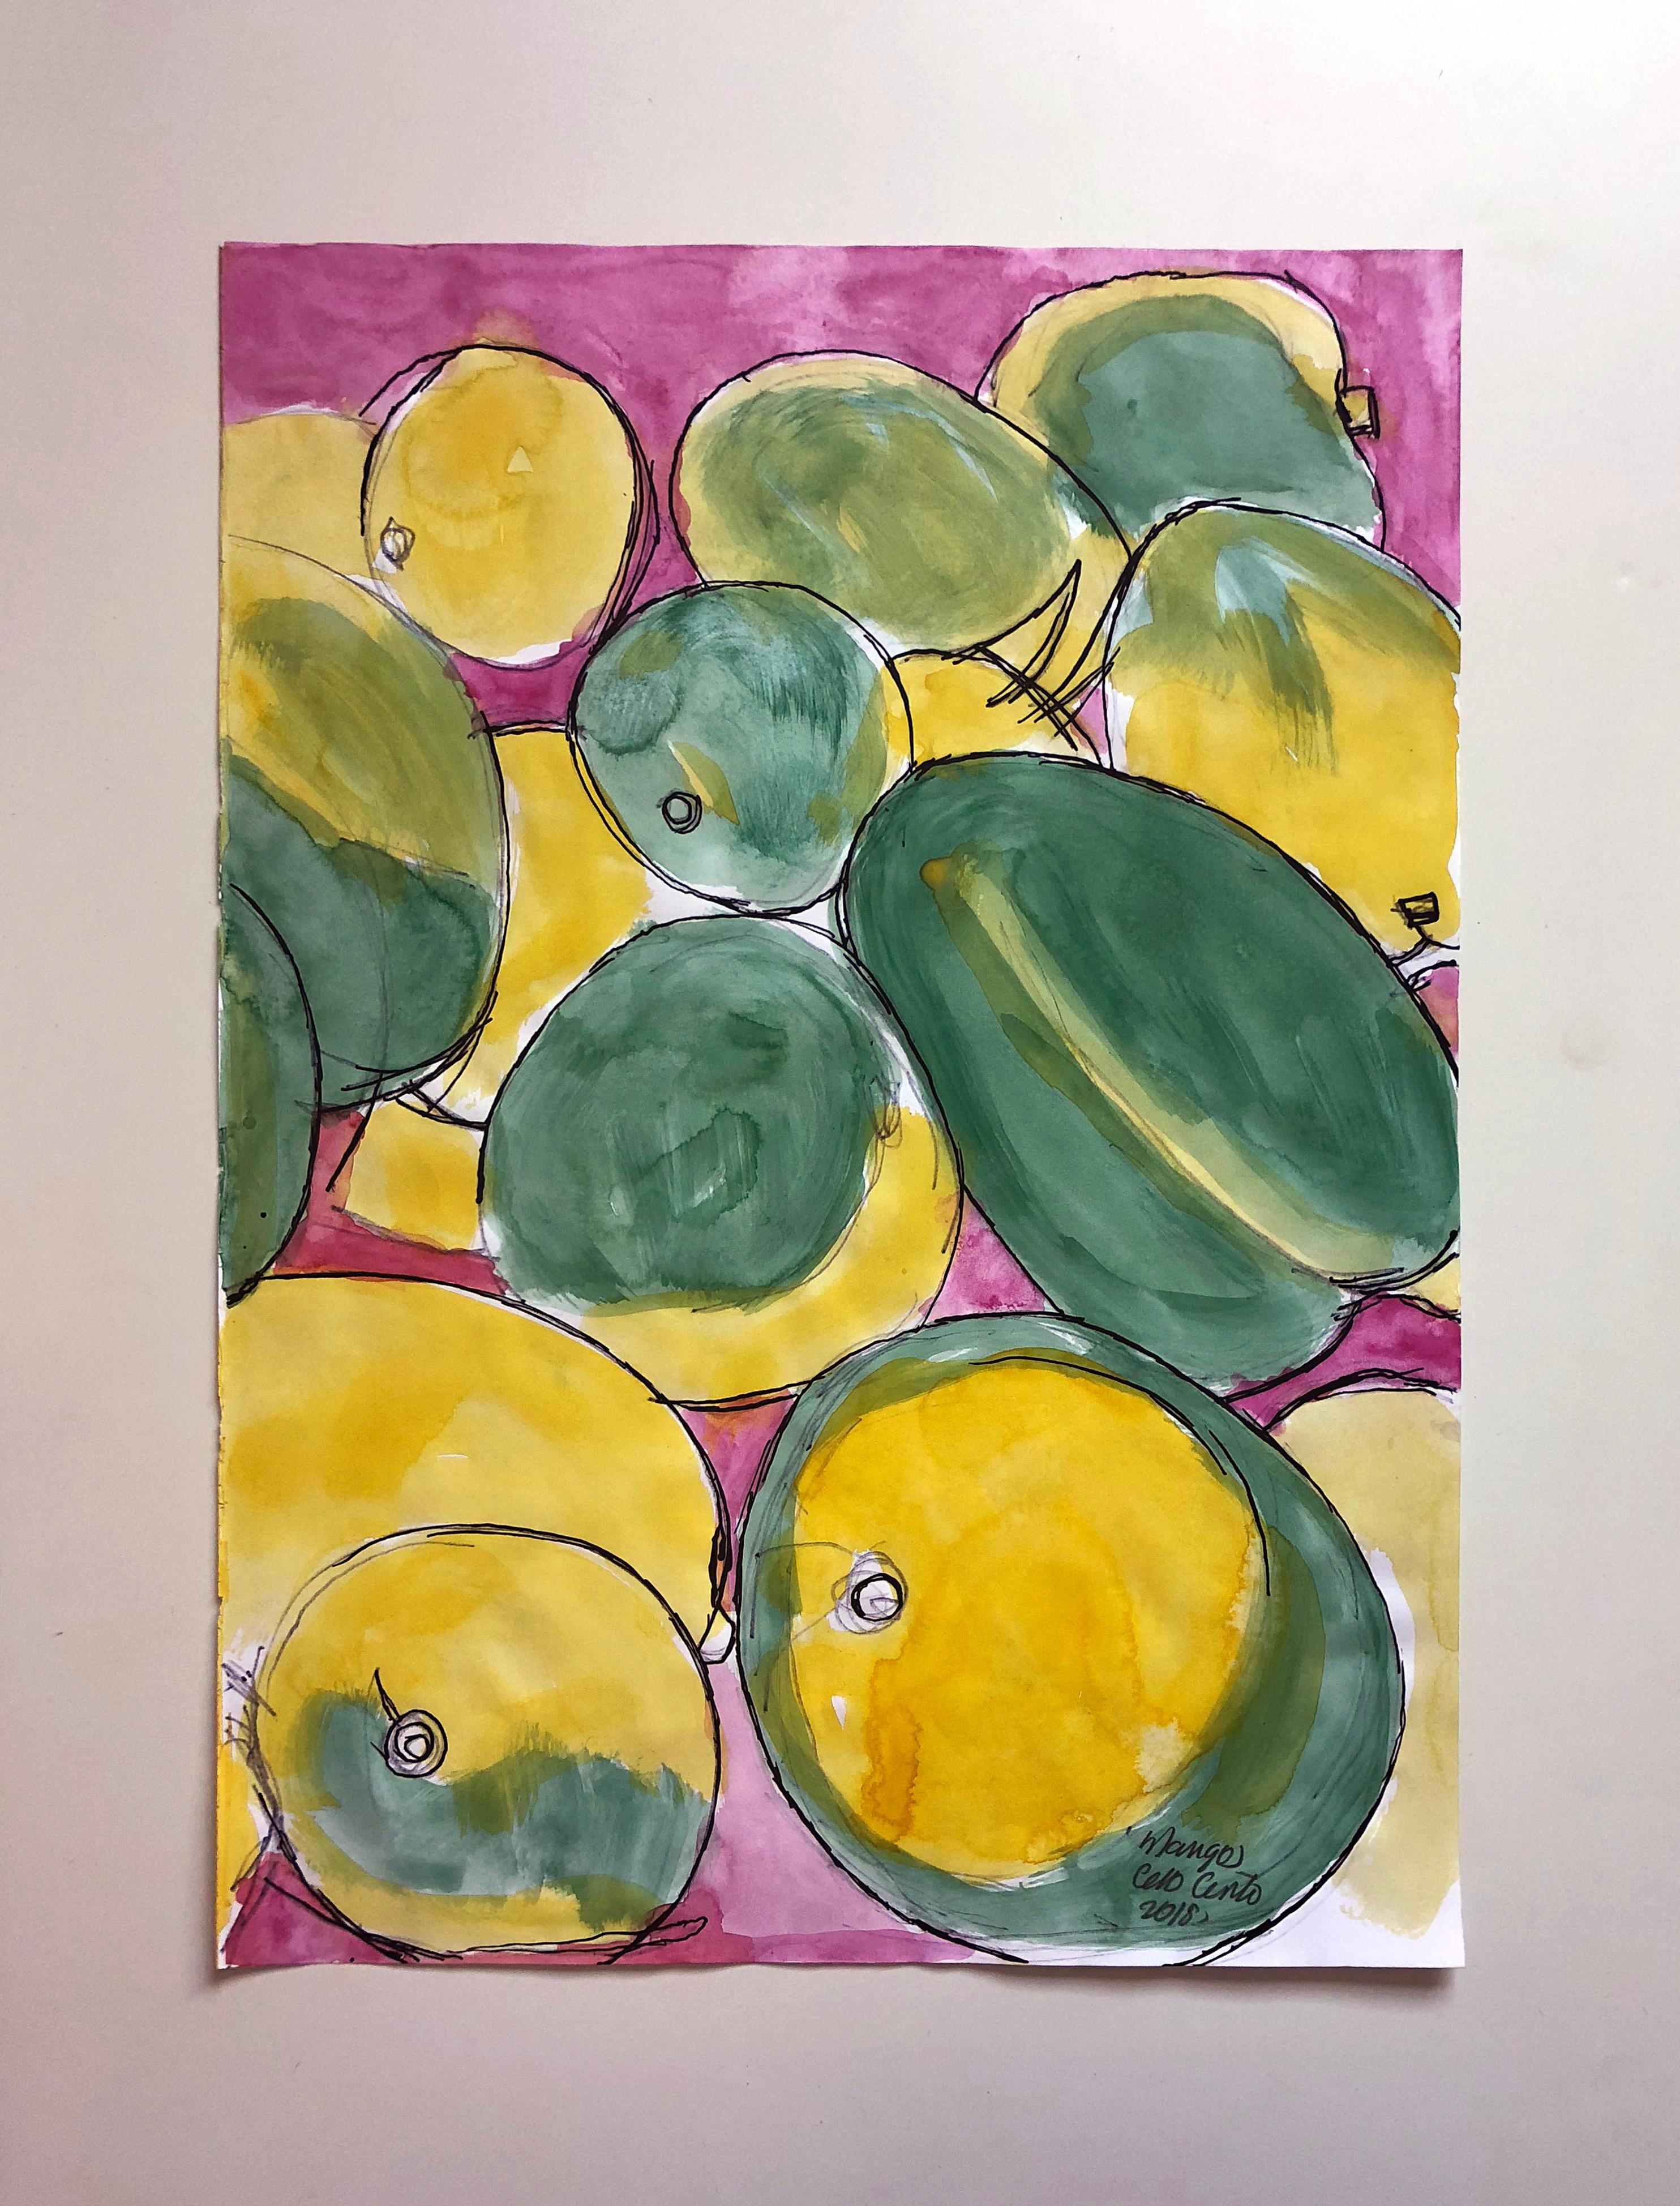 Other Mangos (B2), Watercolor and Ink on Archival Paper, Diptych, 2018